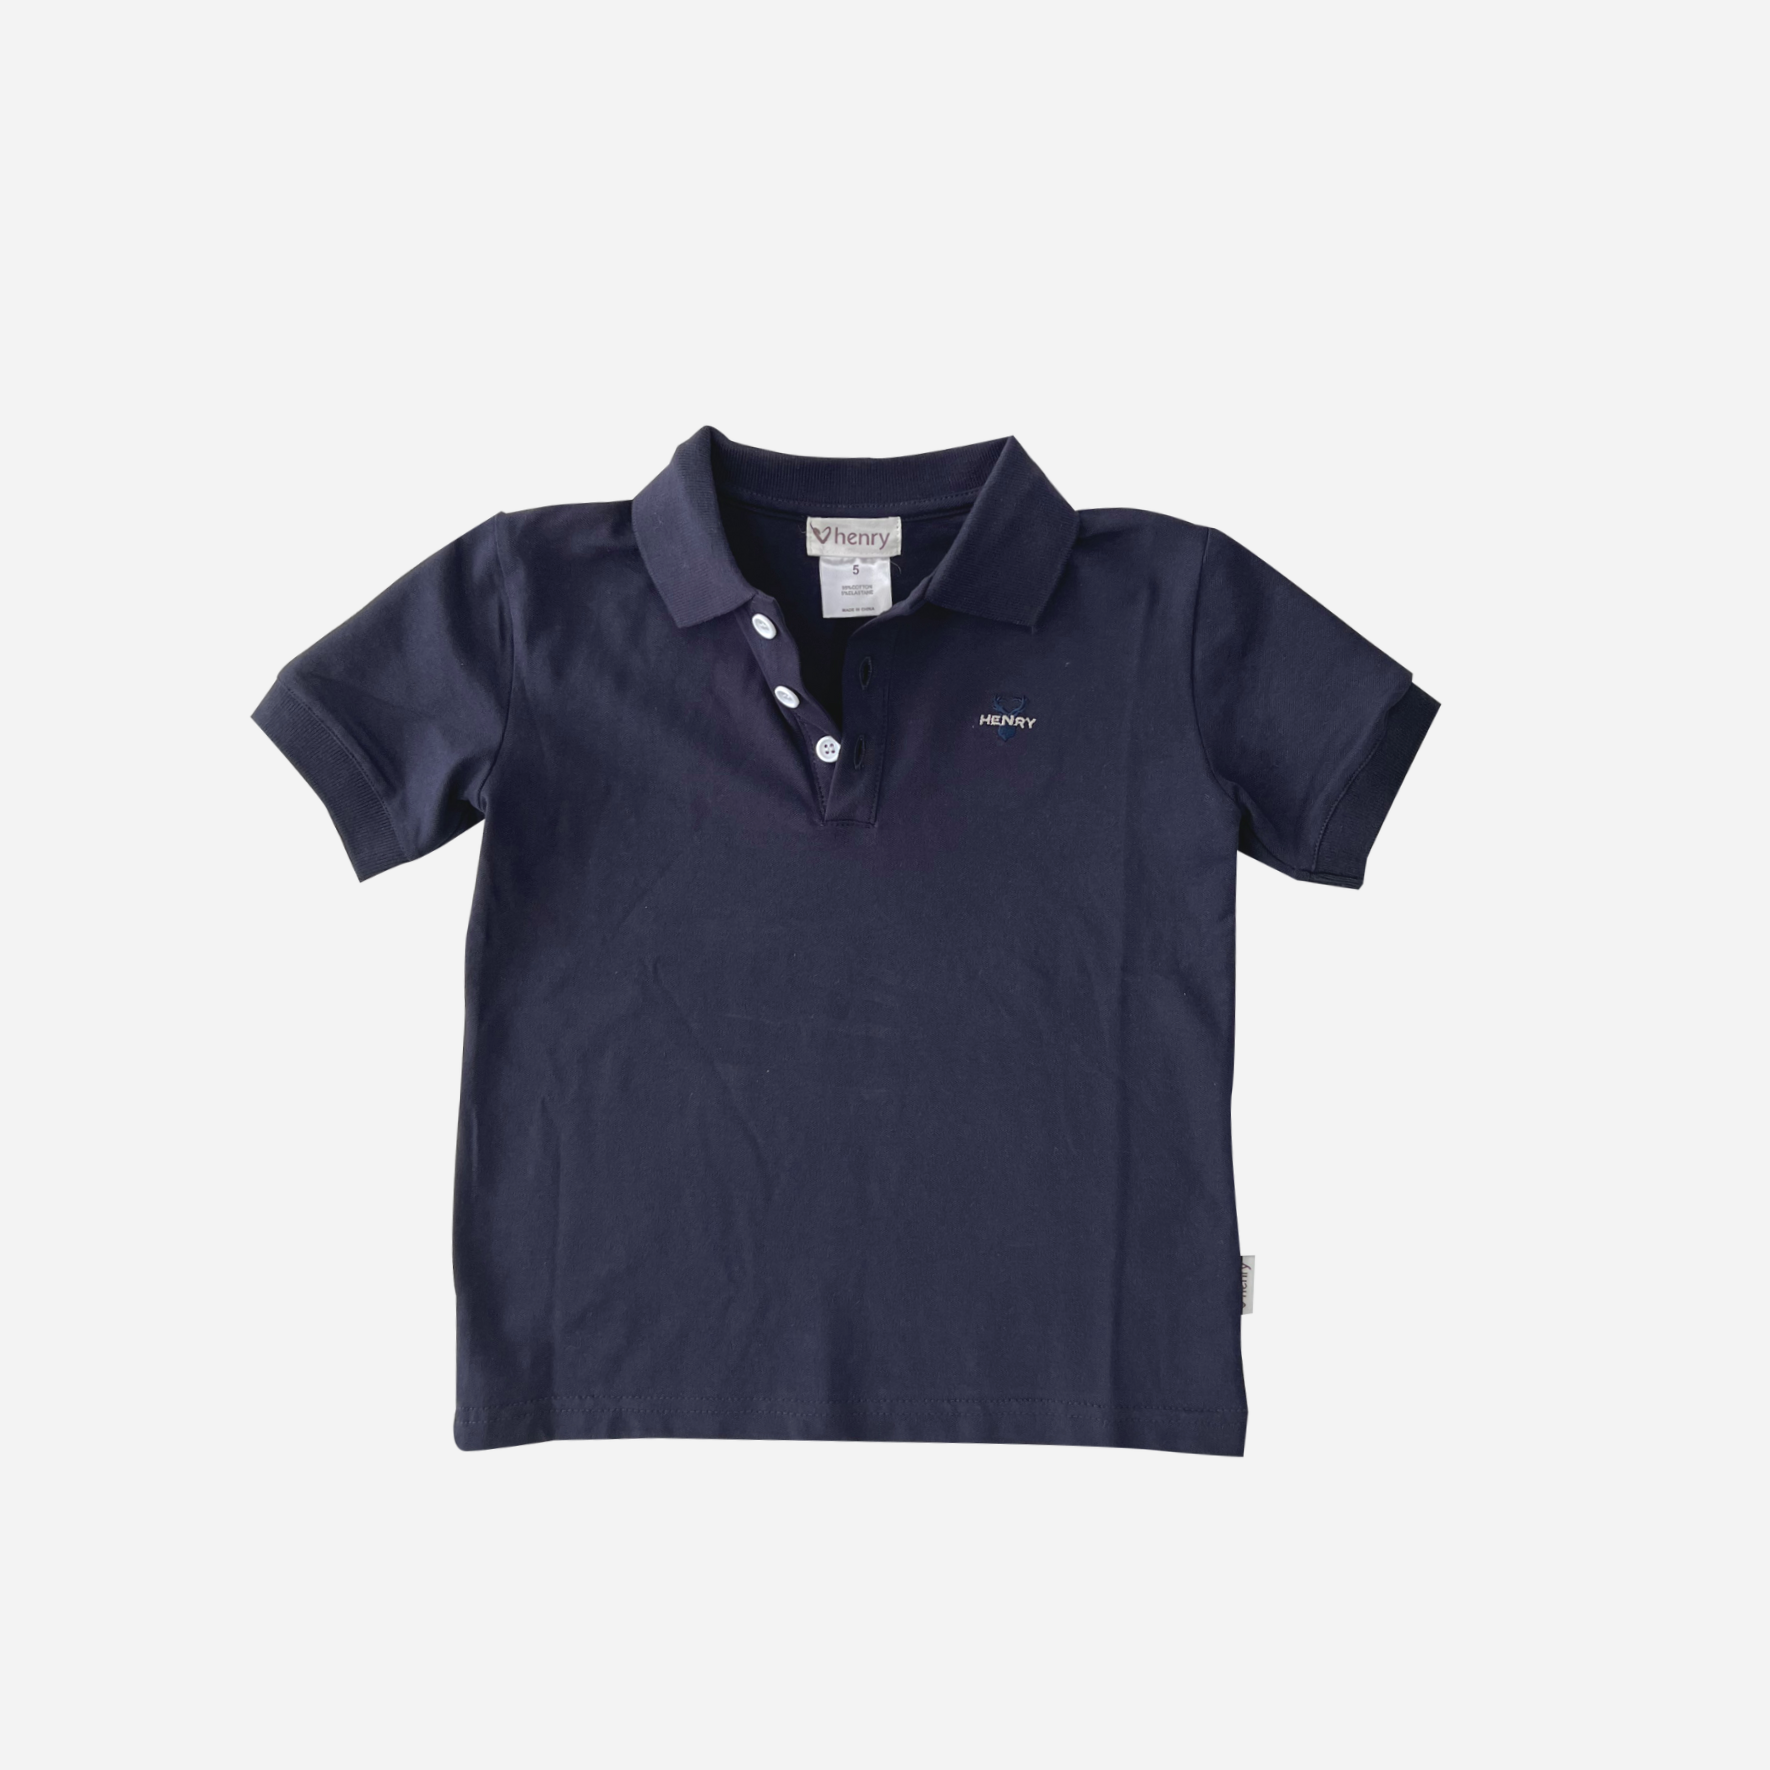 Love Henry polo shirt - angus and dudley